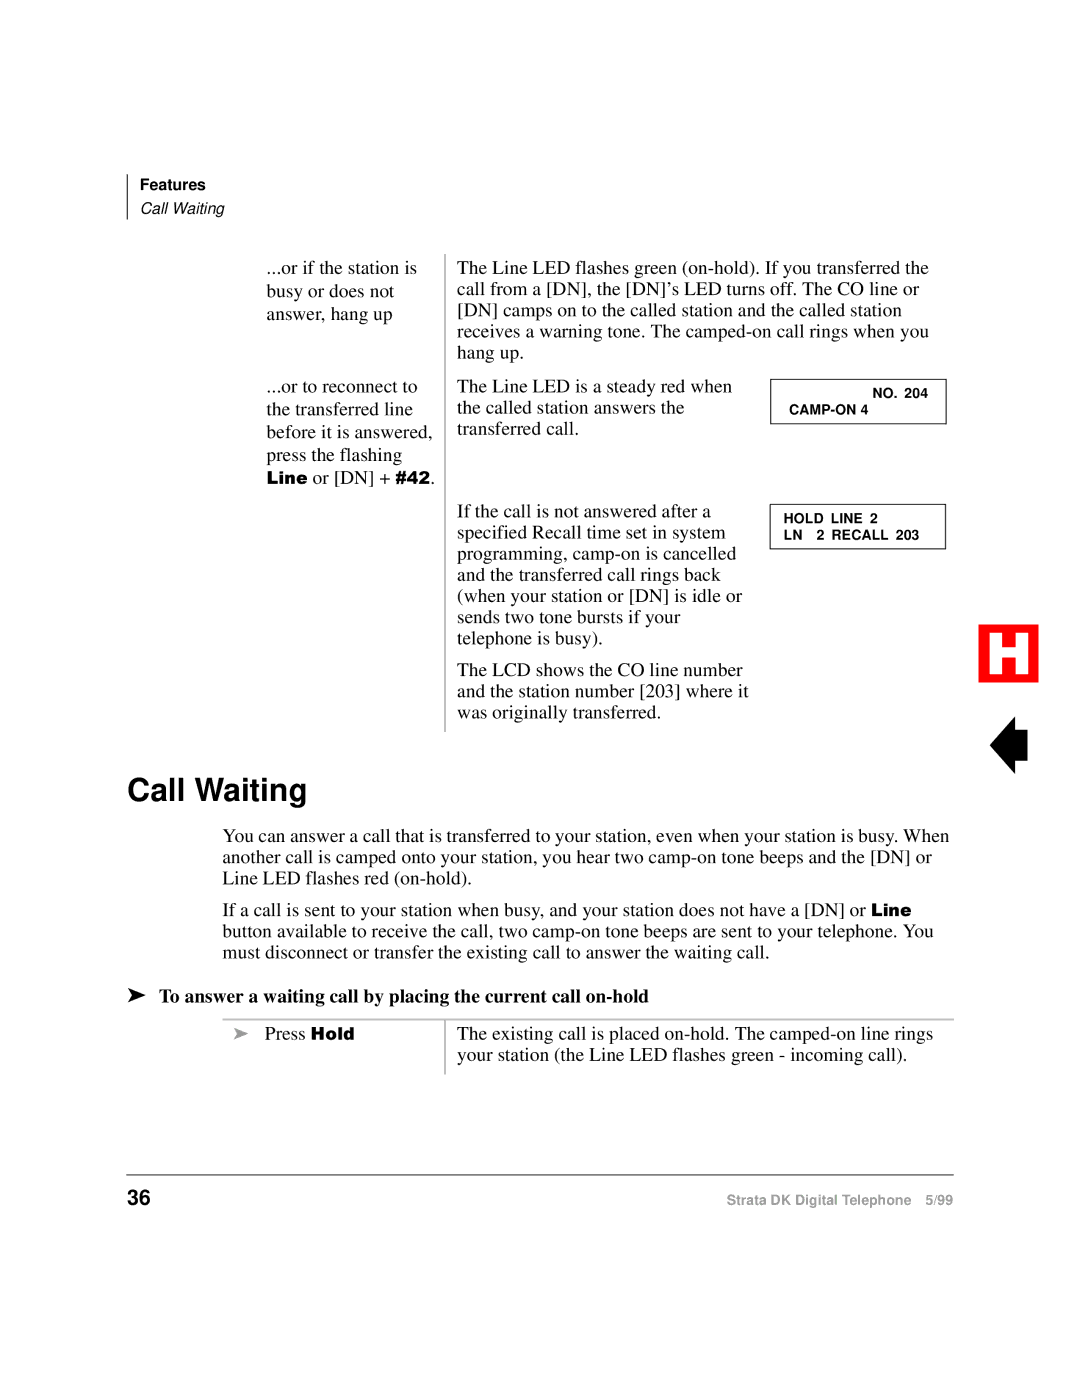 Toshiba Digital Telephone manual Call Waiting, To answer a waiting call by placing the current call on-hold 